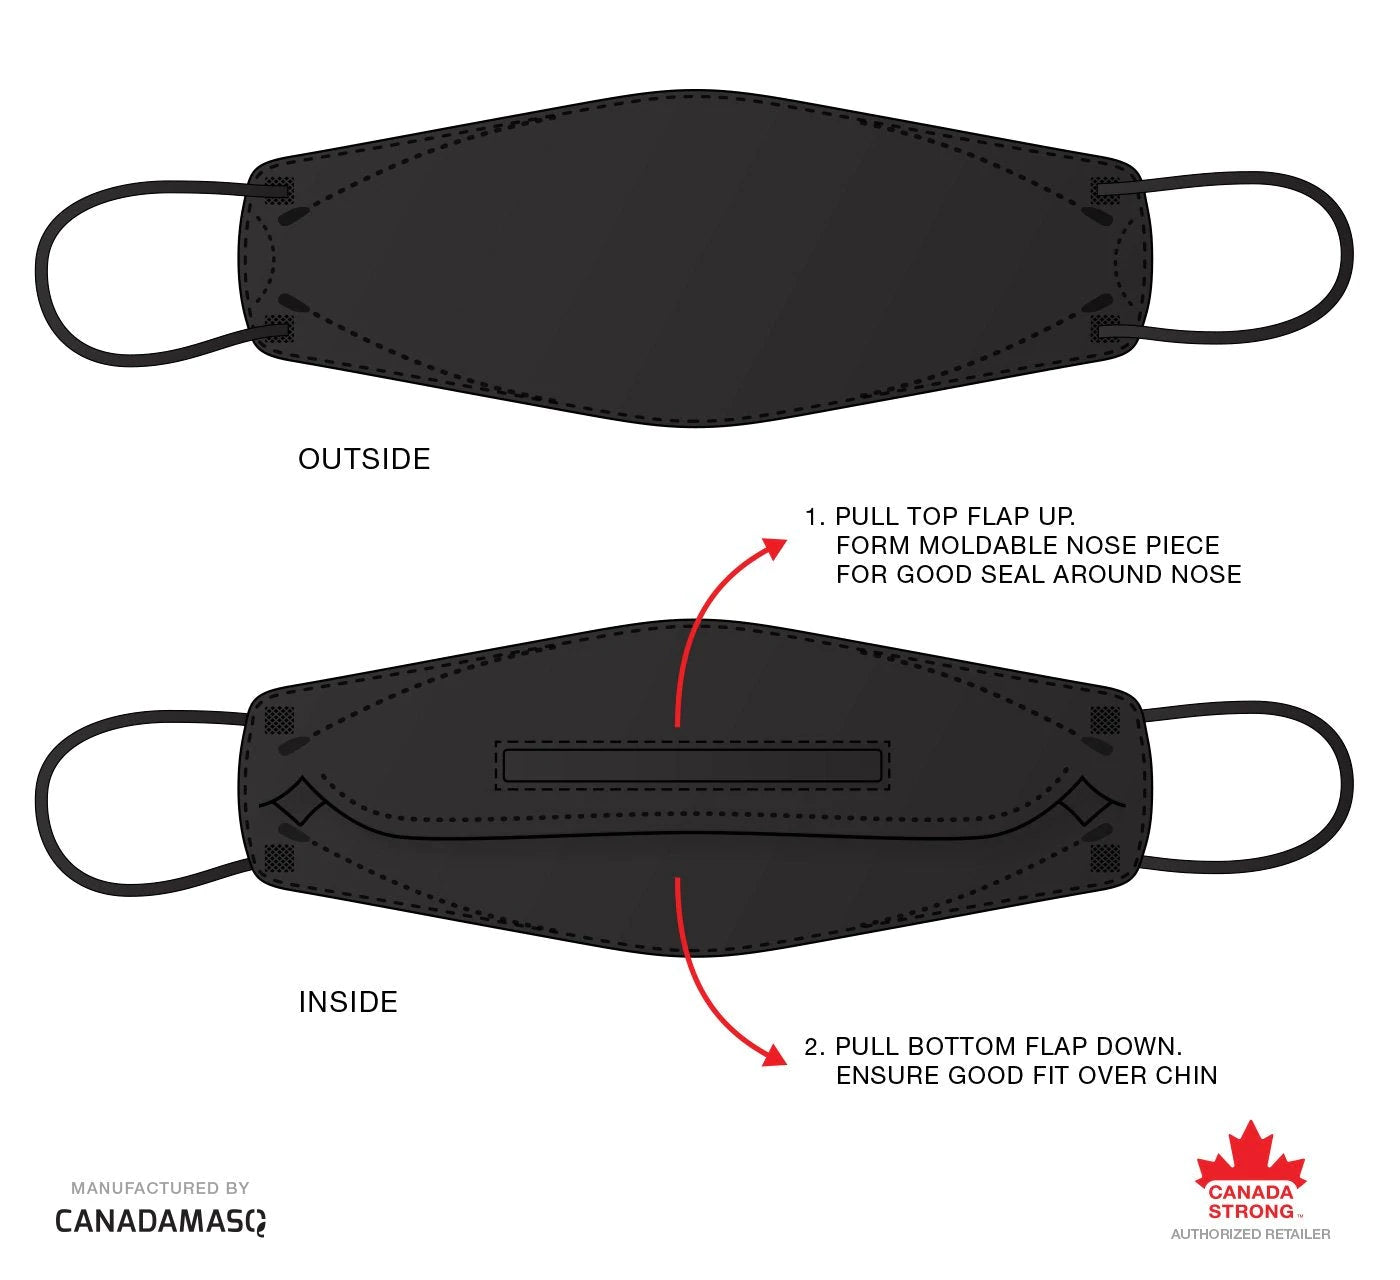 Diagram of the small canada masq black CA-N95 respirator mask canada strong